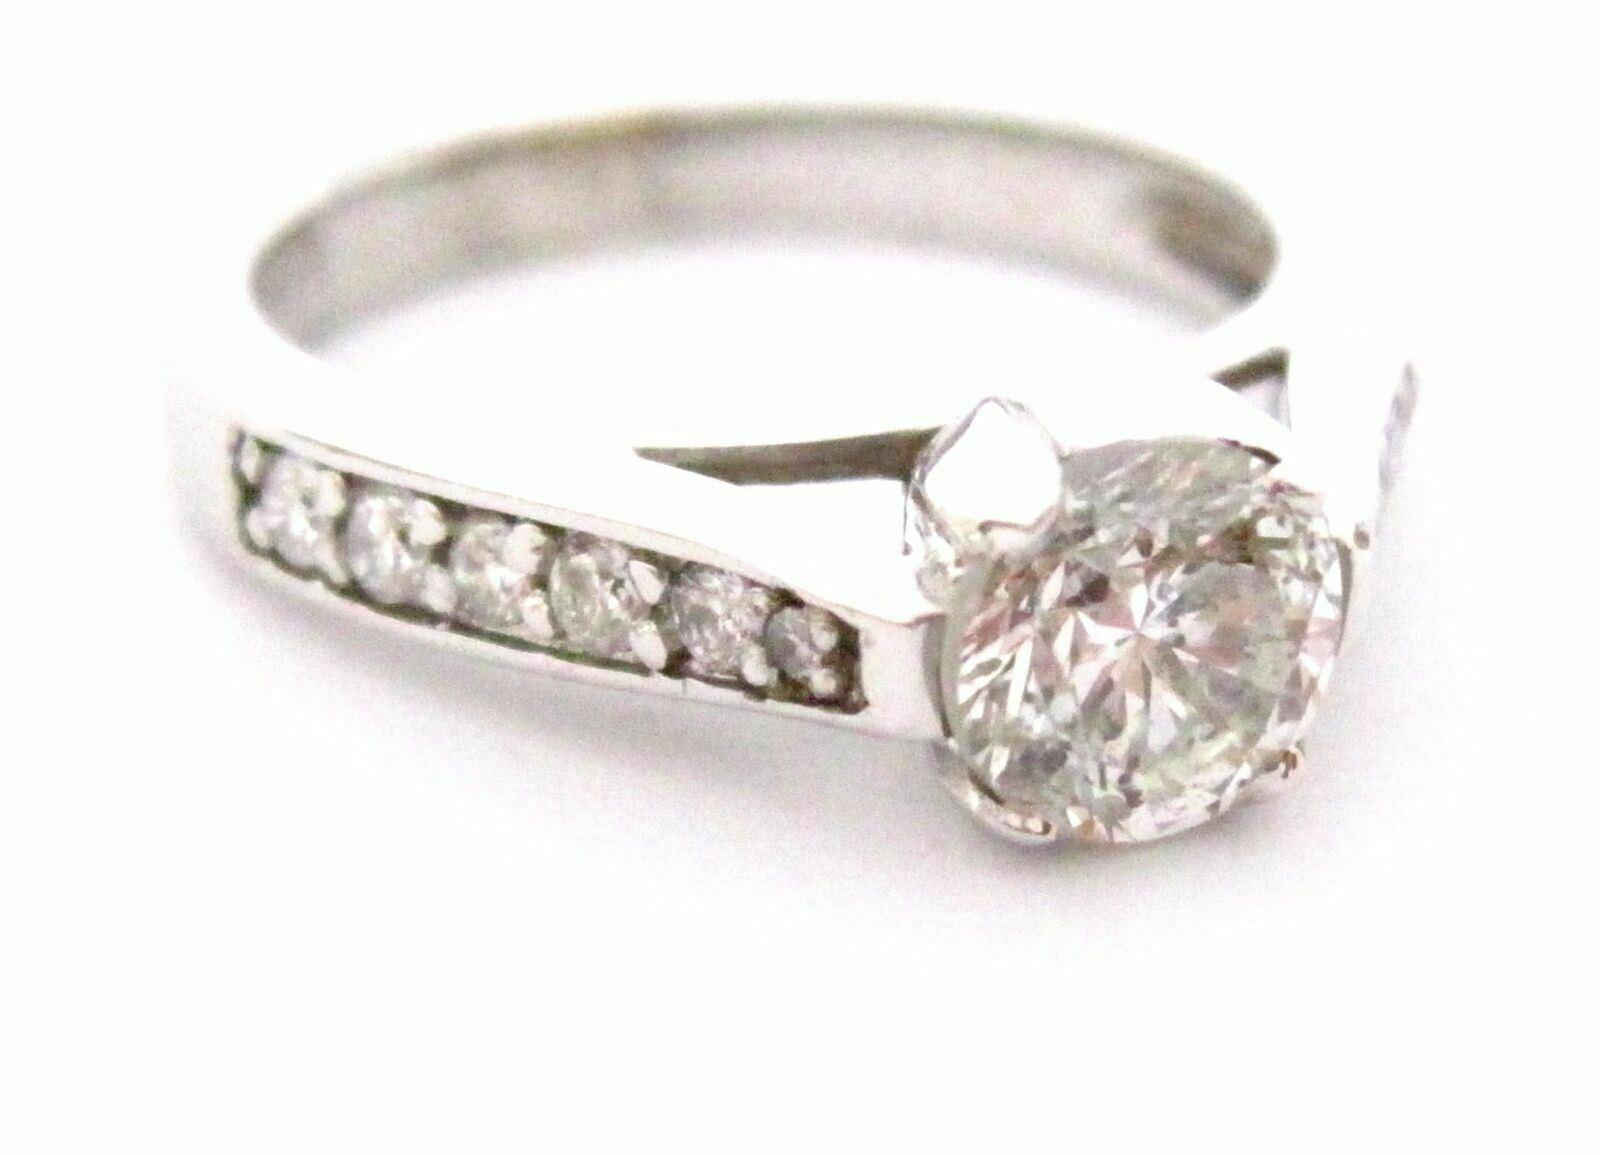 1.27 TCW Round Diamond Solitaire w/ Accents Engagement Ring Size 6.5 G SI1 14k